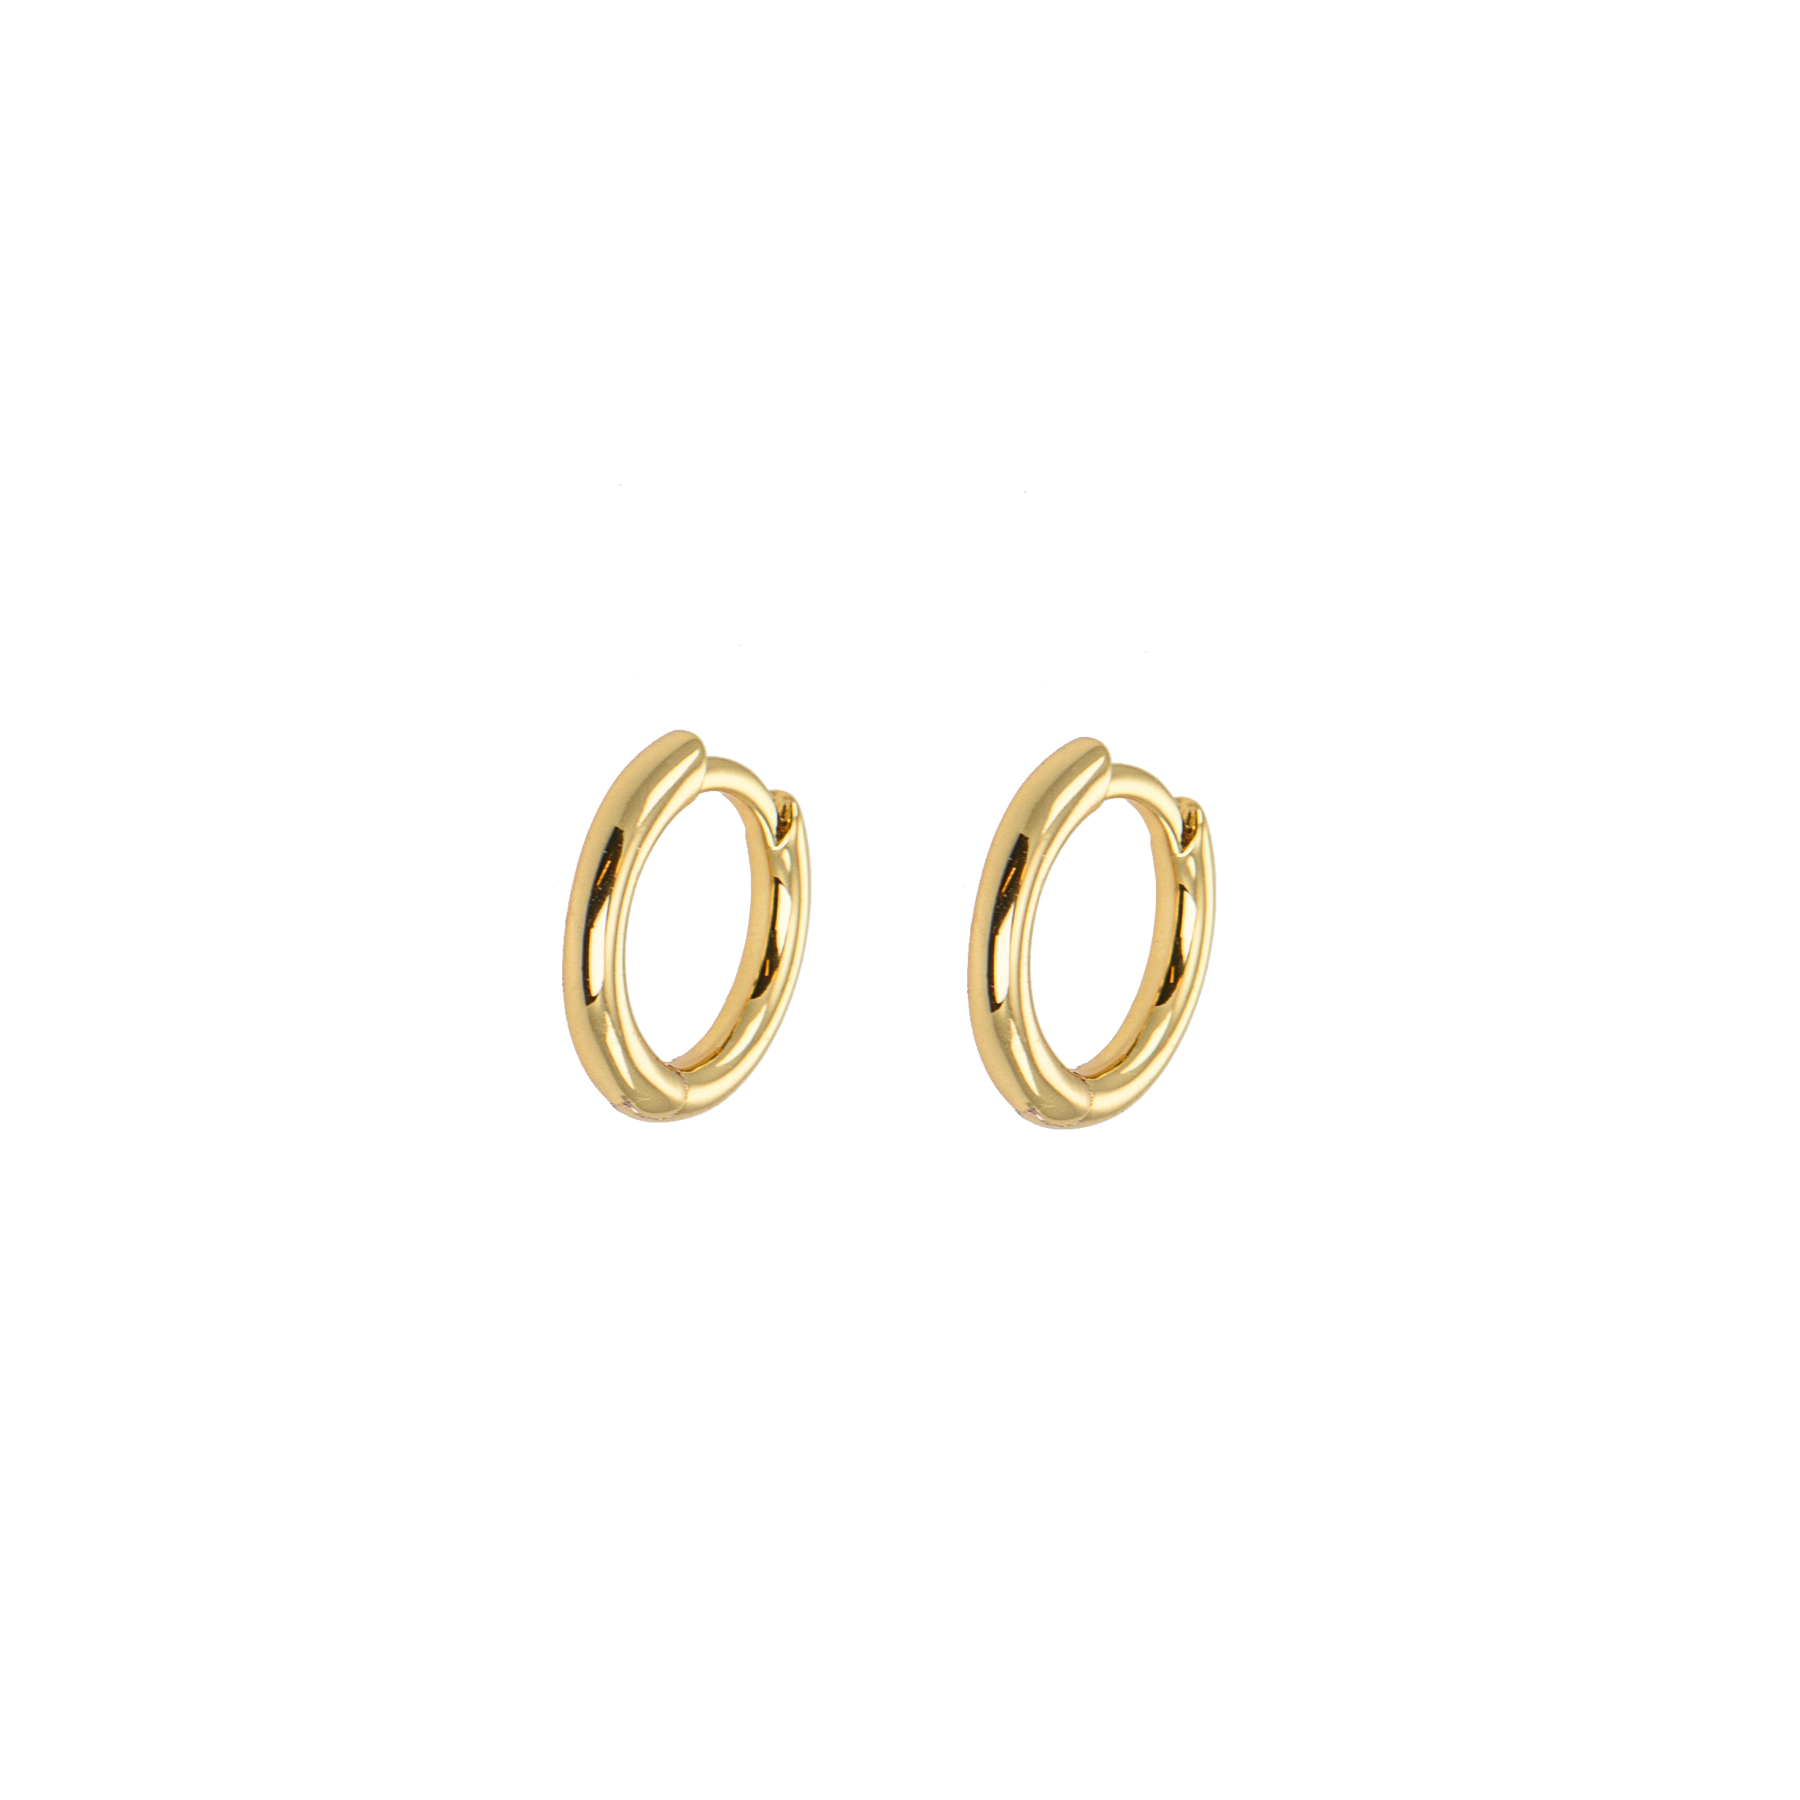 Image of X-small gold hoops from Emilia by Bon Dep